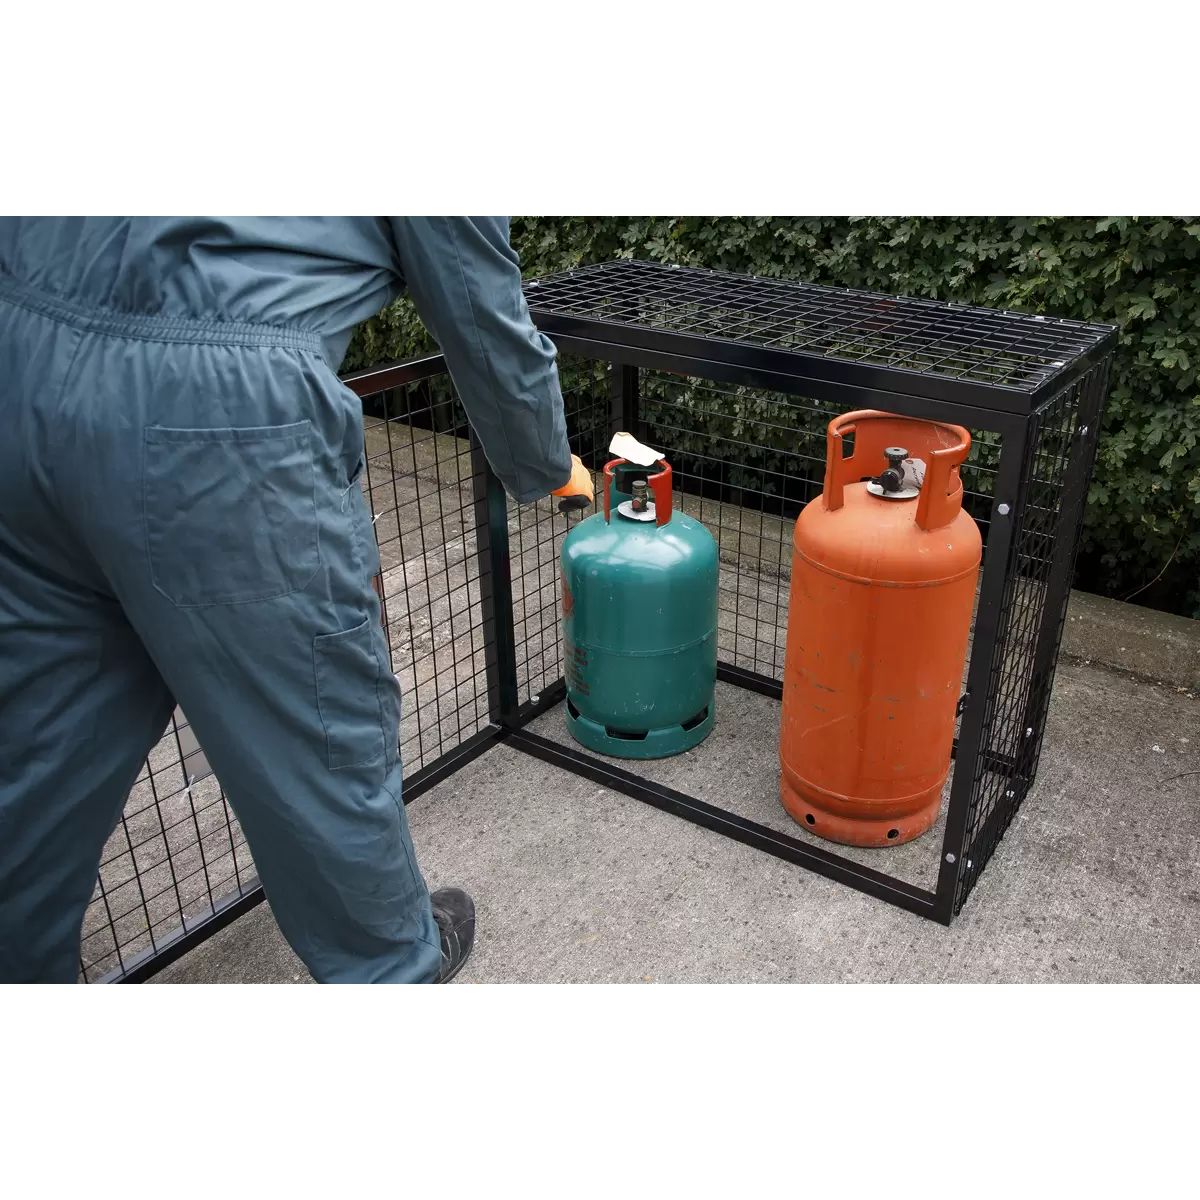 Sealey GCSC247 Gas Cylinders Safety Cage 2 x 47kg Cylinders